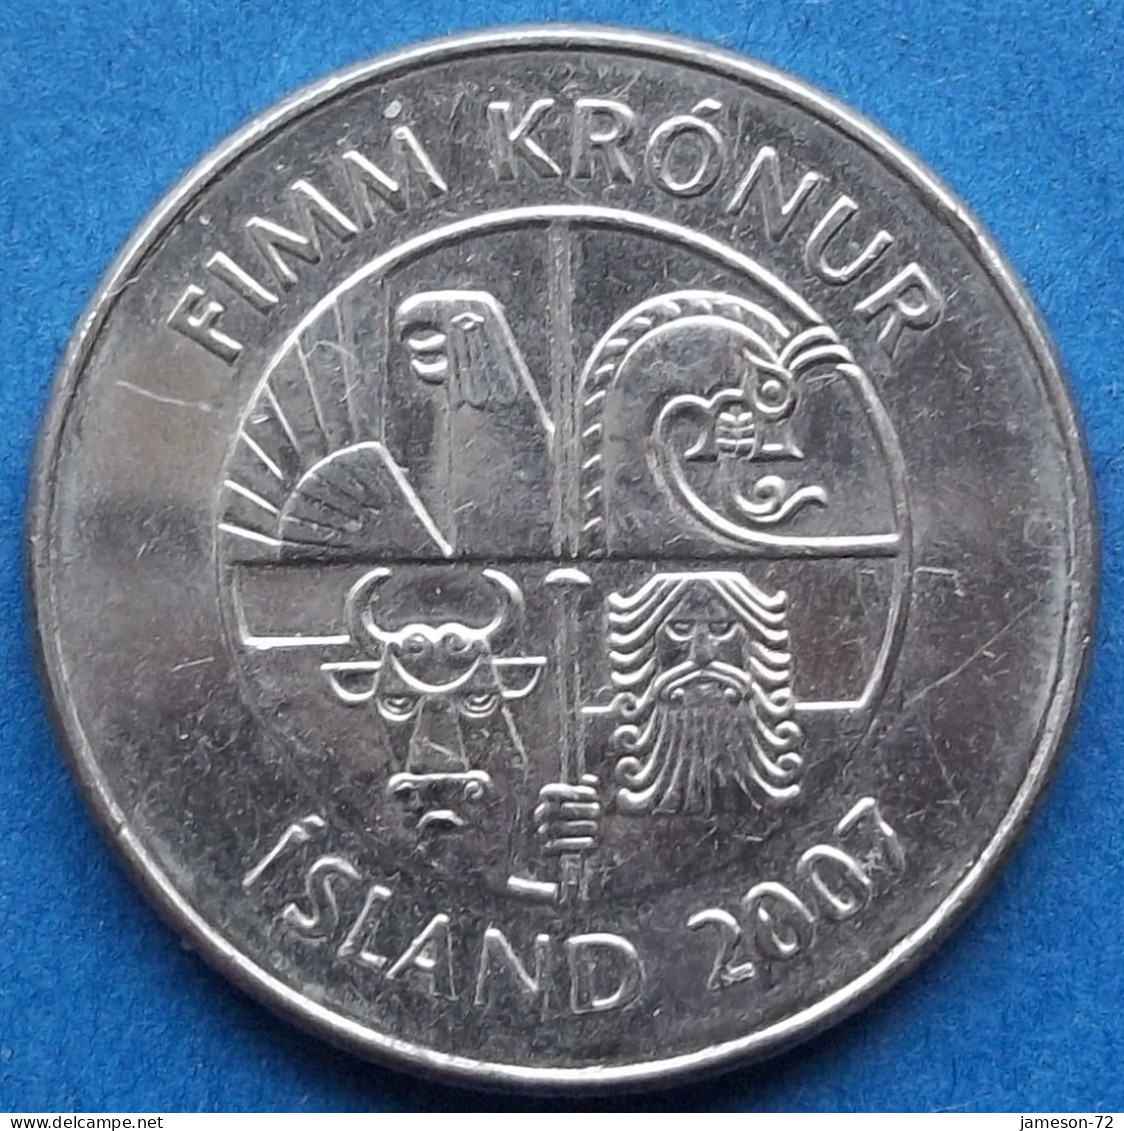 ICELAND - 5 Kronur 2007 "Two Dolphins" KM# 28a Monetary Reform (1981) - Edelweiss Coins - Iceland